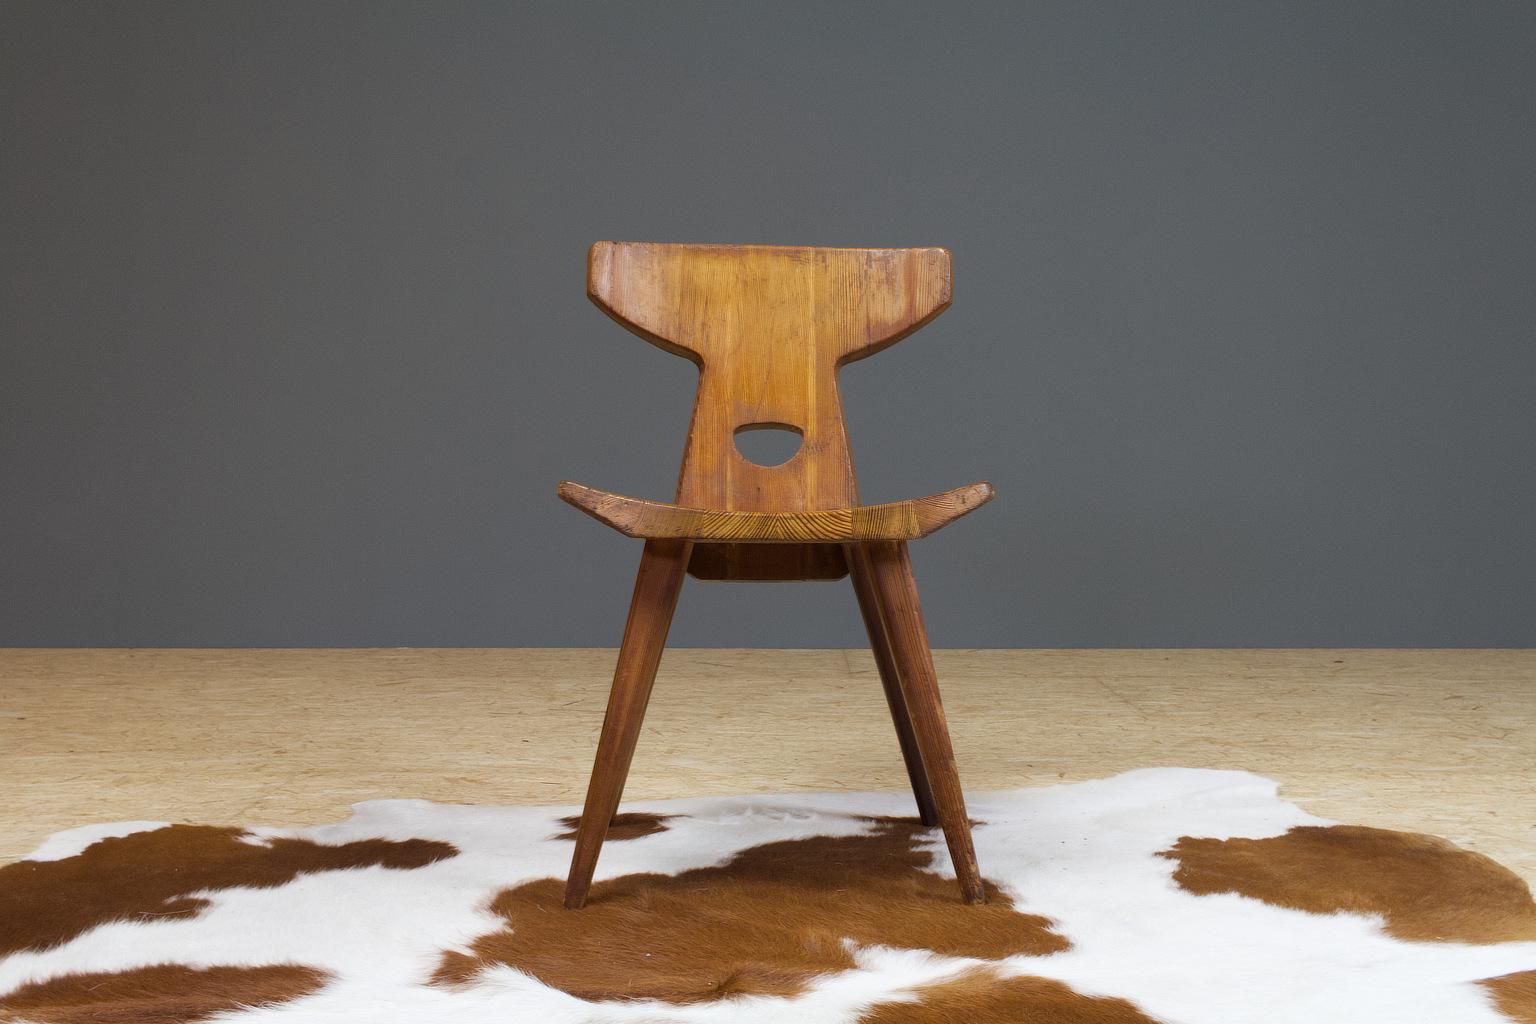 A Scandinavian Modern pine wooden dining room chair designed by Jacob Kielland-Brandt for Christiansen, Denmark, 1960. A great example of Danish craftsmanship, the chair is constructed without screws and uses only pen-hole connections, which are